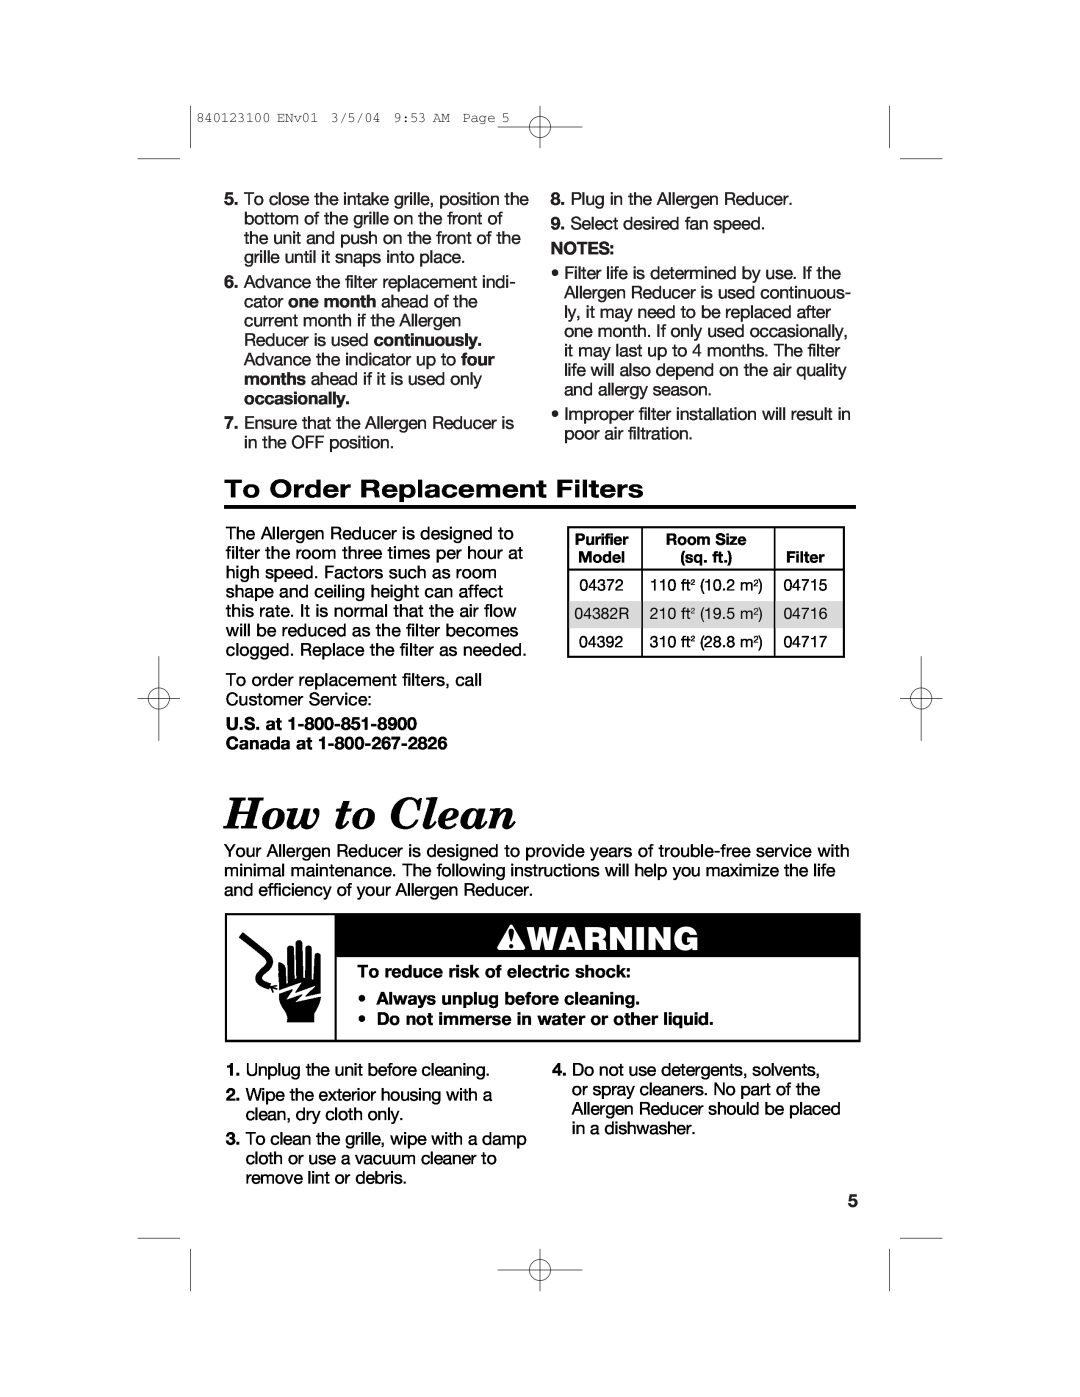 Hamilton Beach 840123100 manual How to Clean, To Order Replacement Filters, Notes, U.S. at Canada at, wWARNING 